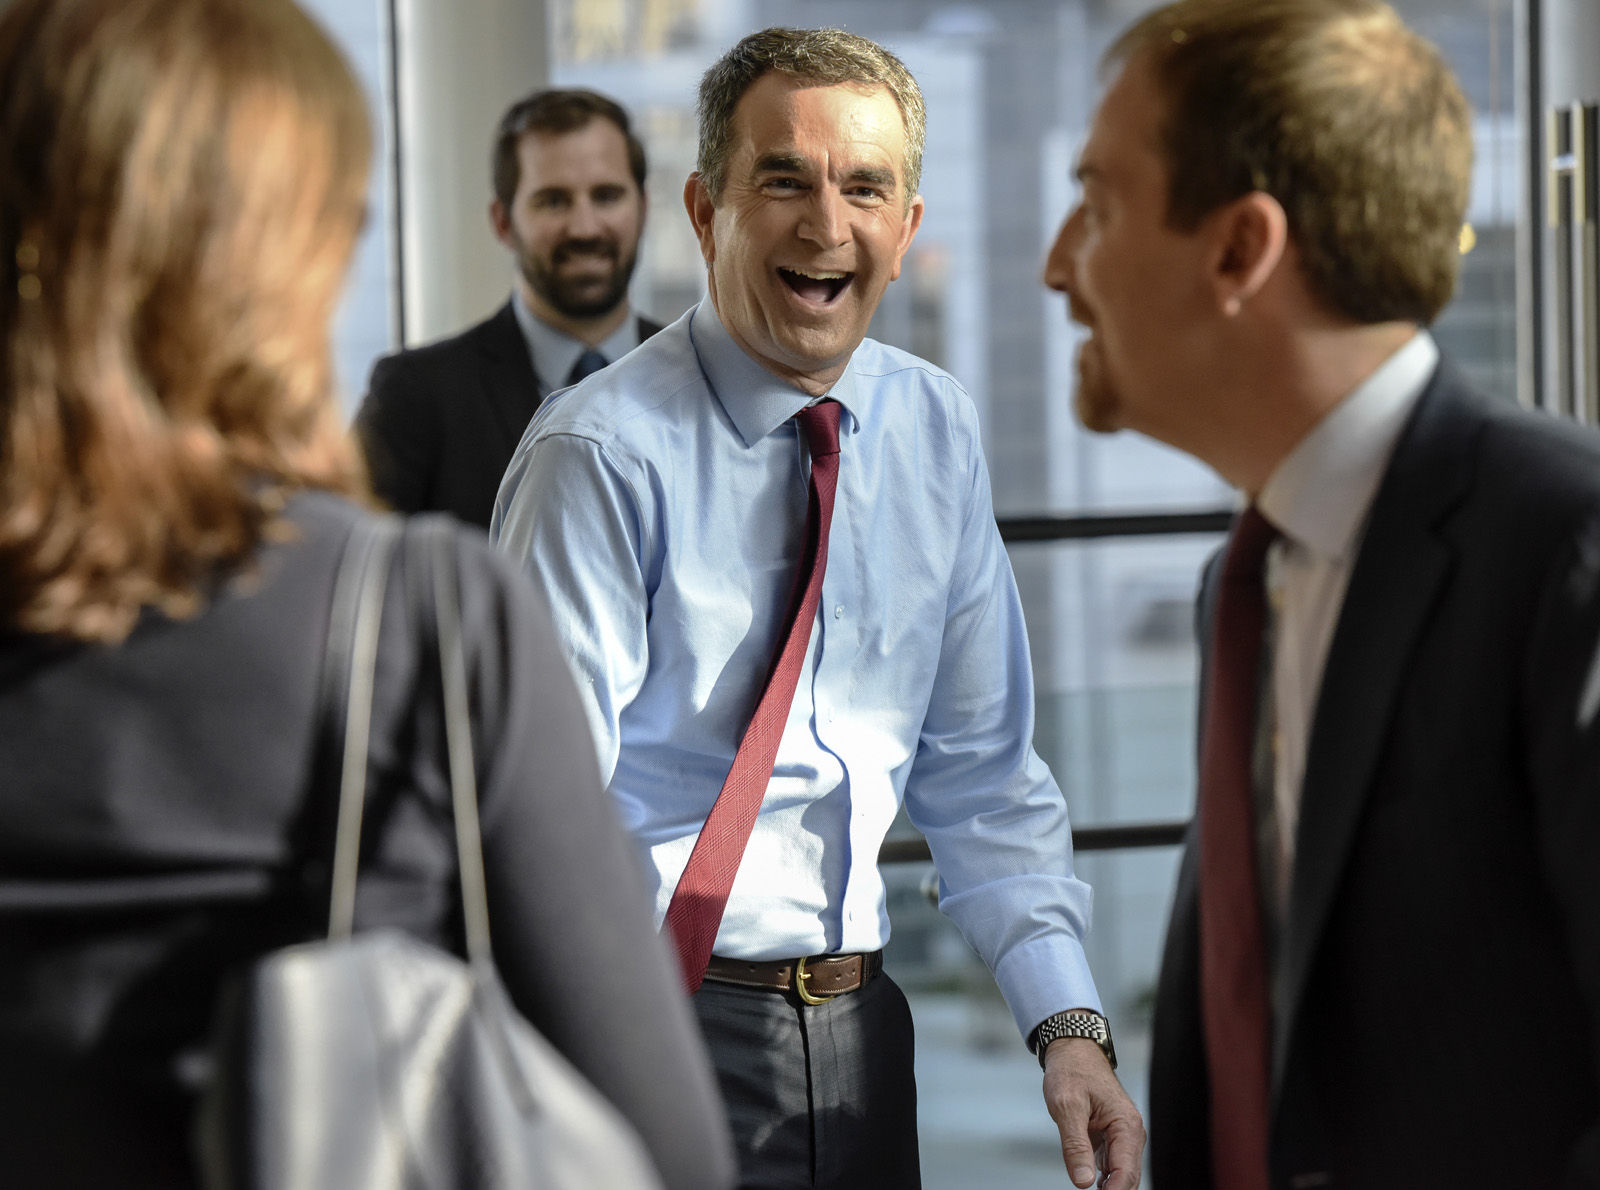 MCLEAN, VA - SEPTEMBER 19:
Lt. Gov. Ralph Northam, center, runs into modertator Chuck Todd, right, during his walk-through before tonight's Gubernatorial debate between himself and Republican candidate Ed Gillespie, on September, 19, 2017 in McLean, VA.
(Pool Photo by Bill O'Leary/The Washington Post)